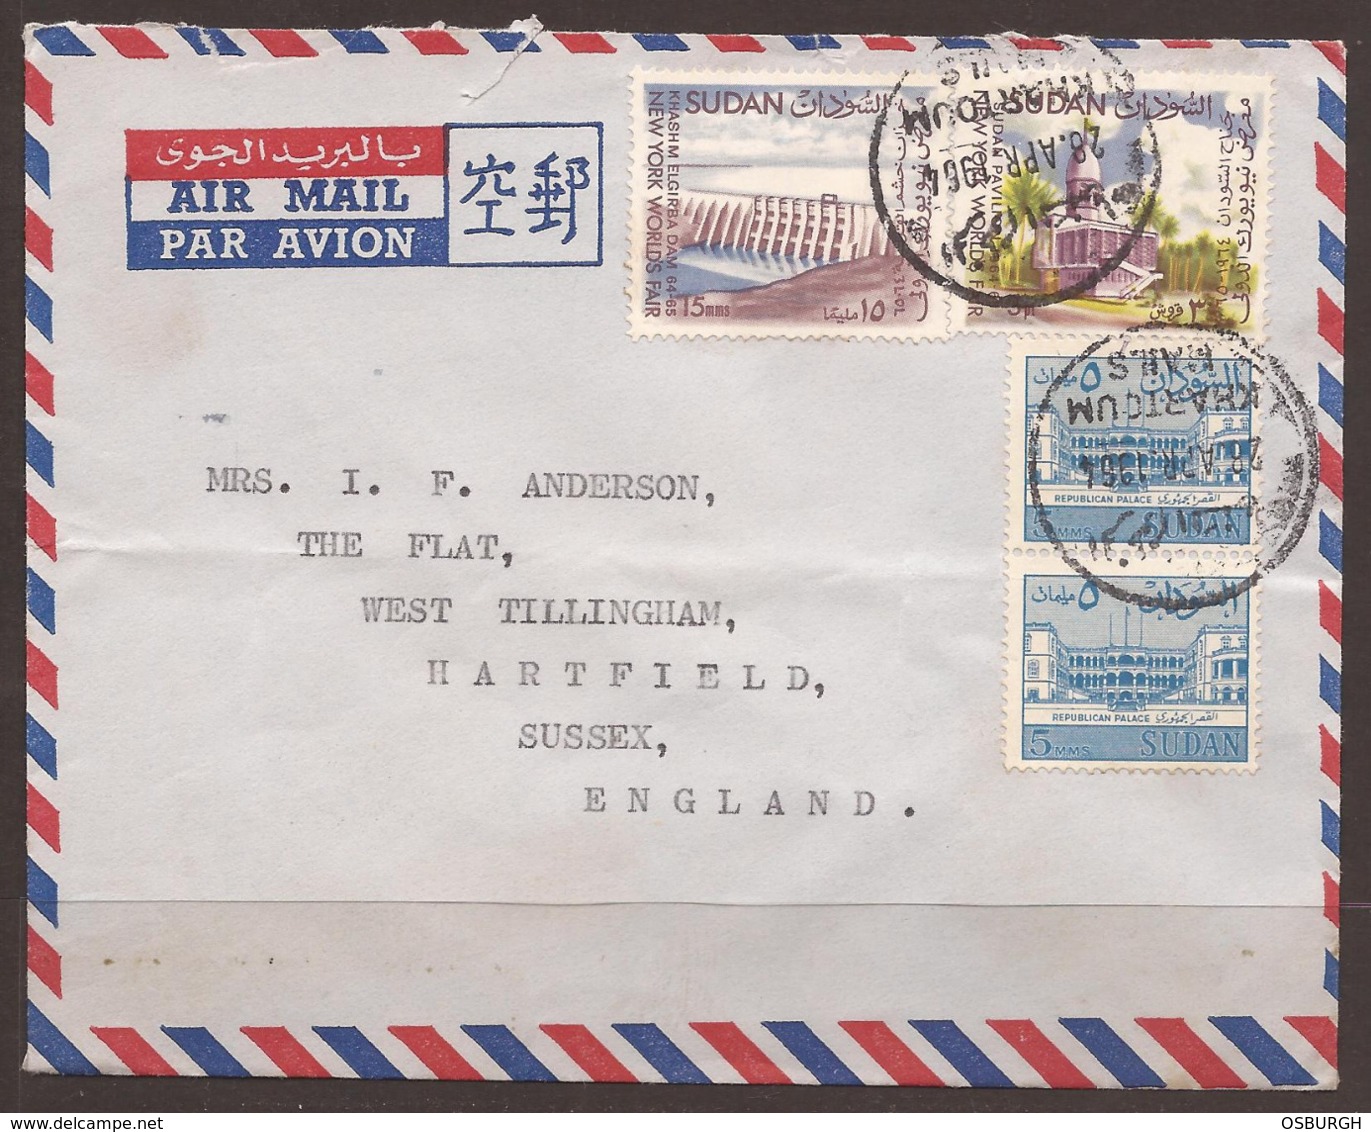 SUDAN.  1964. AIR MAIL COVER. NEW YORK WORLD FAIR AND REPULICAN PALACE ISSUES. - Sudan (1954-...)